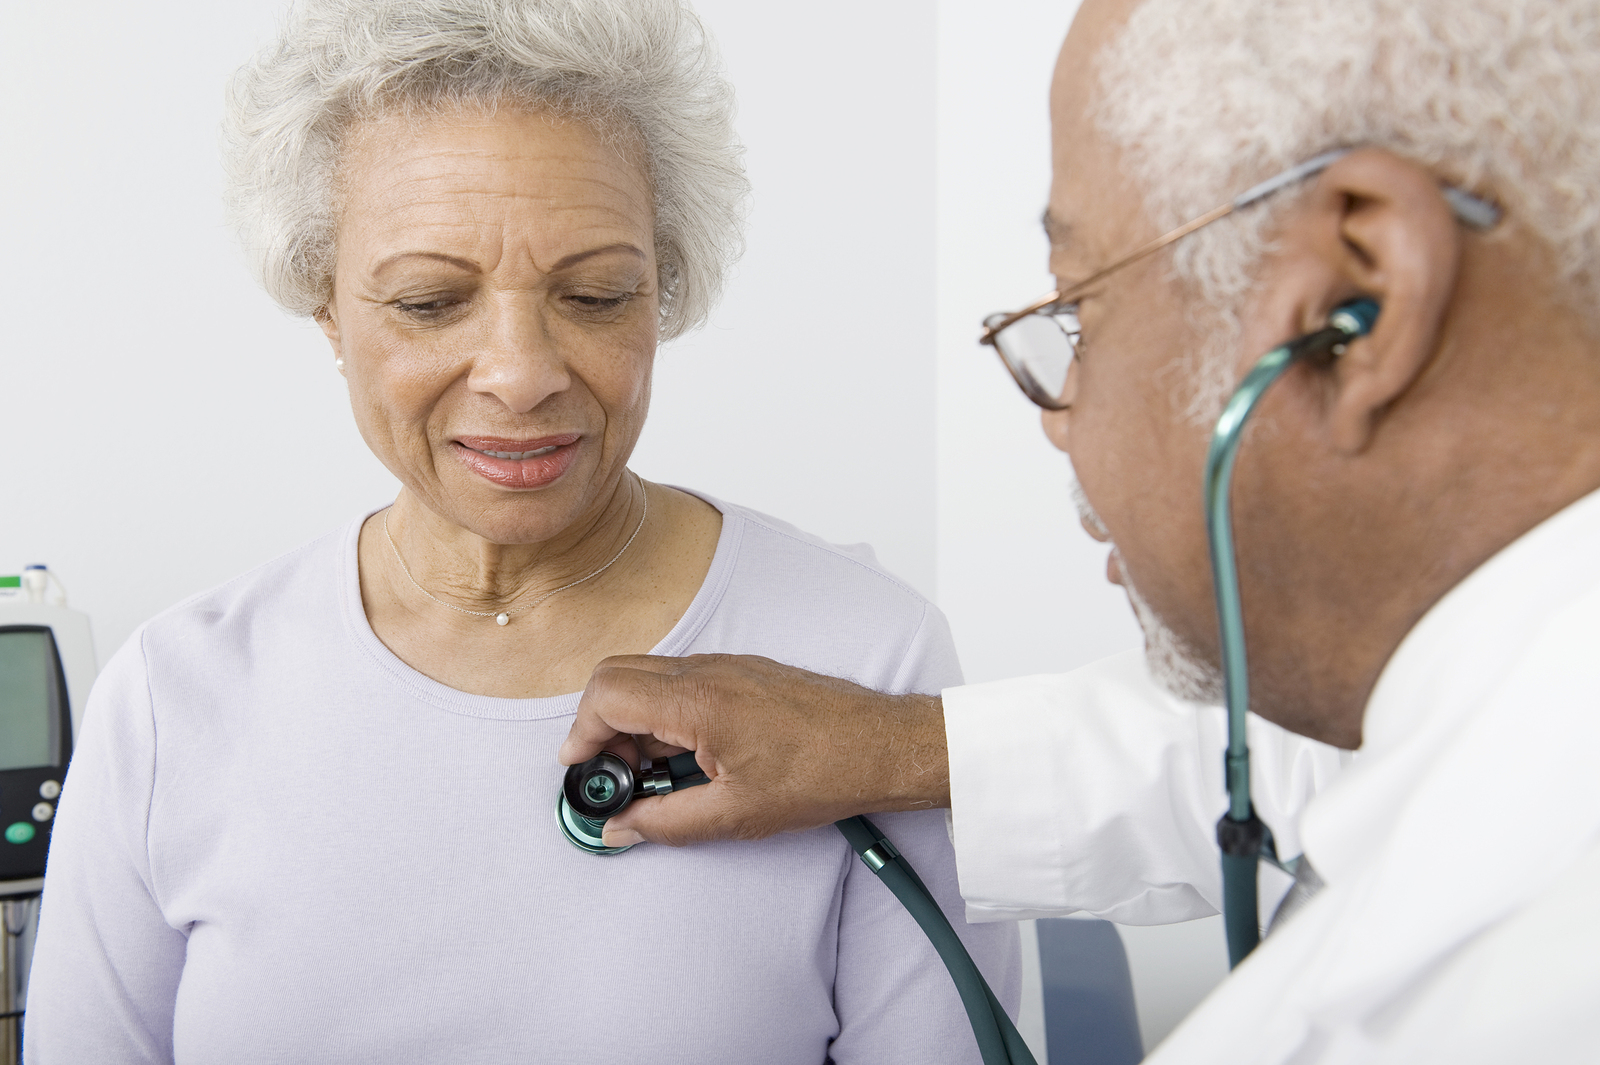 African American doctor checking patient using stethoscope